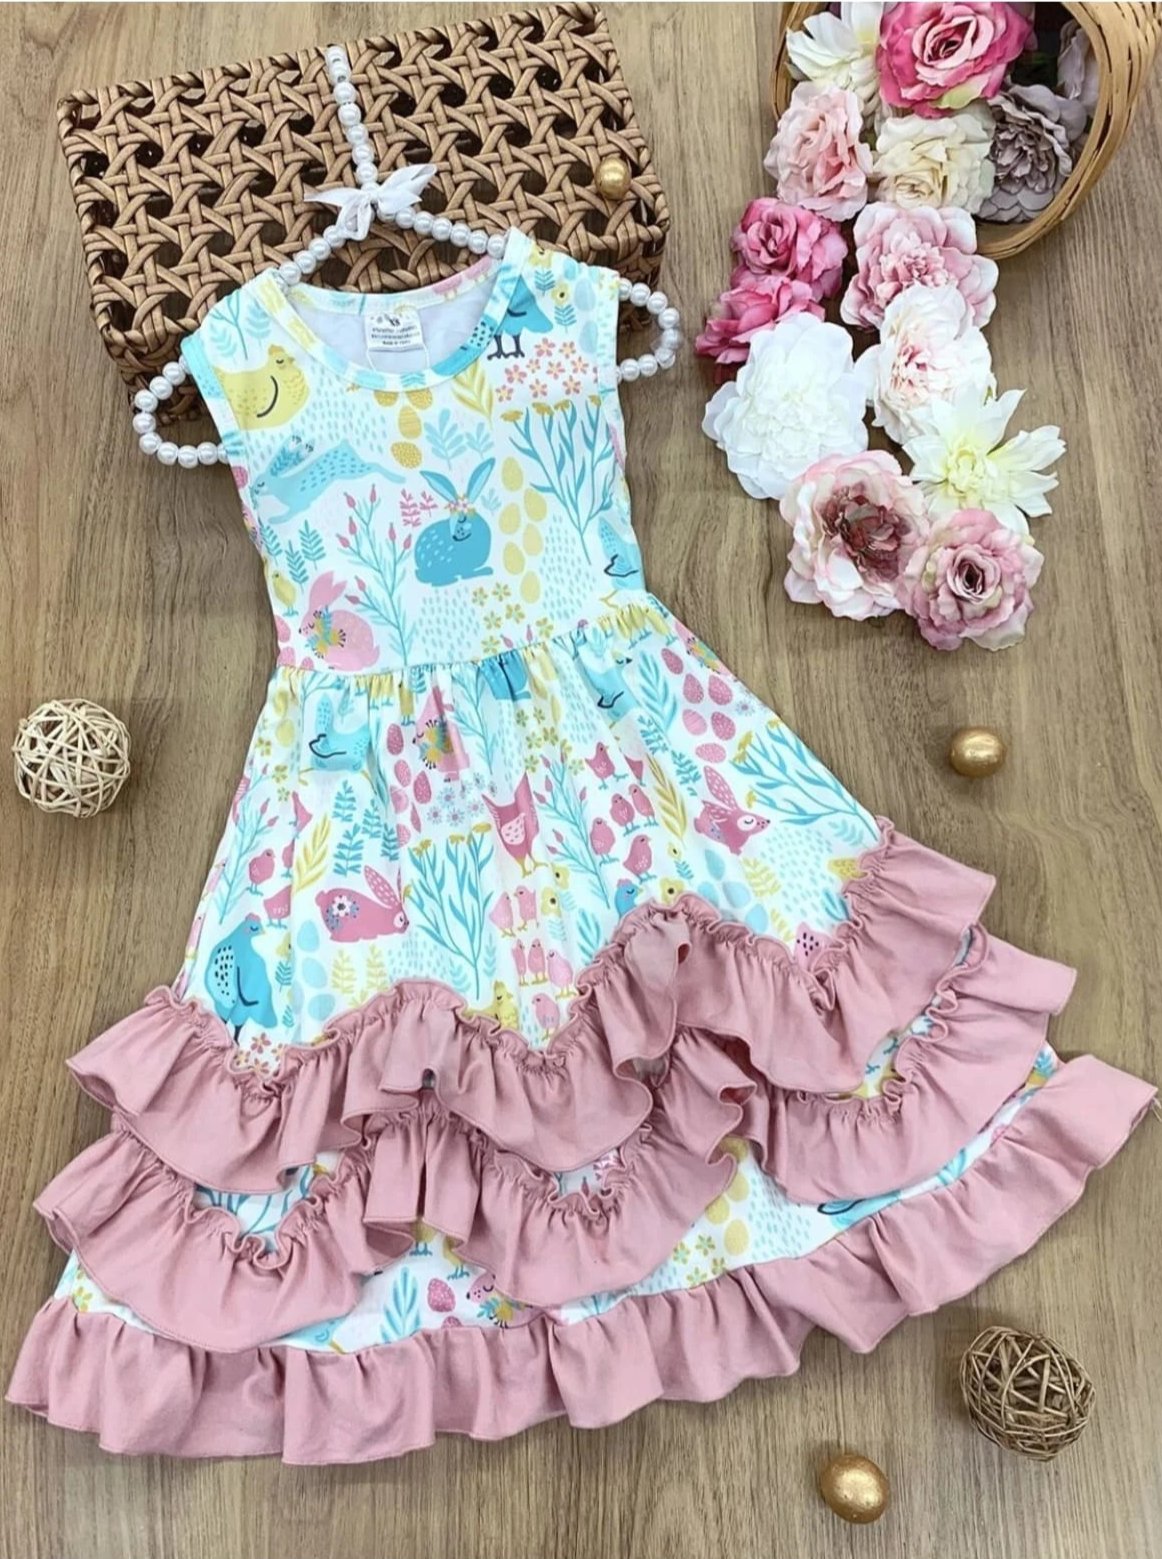 Casual dress features a tiered ruffled hem and a print that features animals (rabbits and chickens), florals, and leaves 